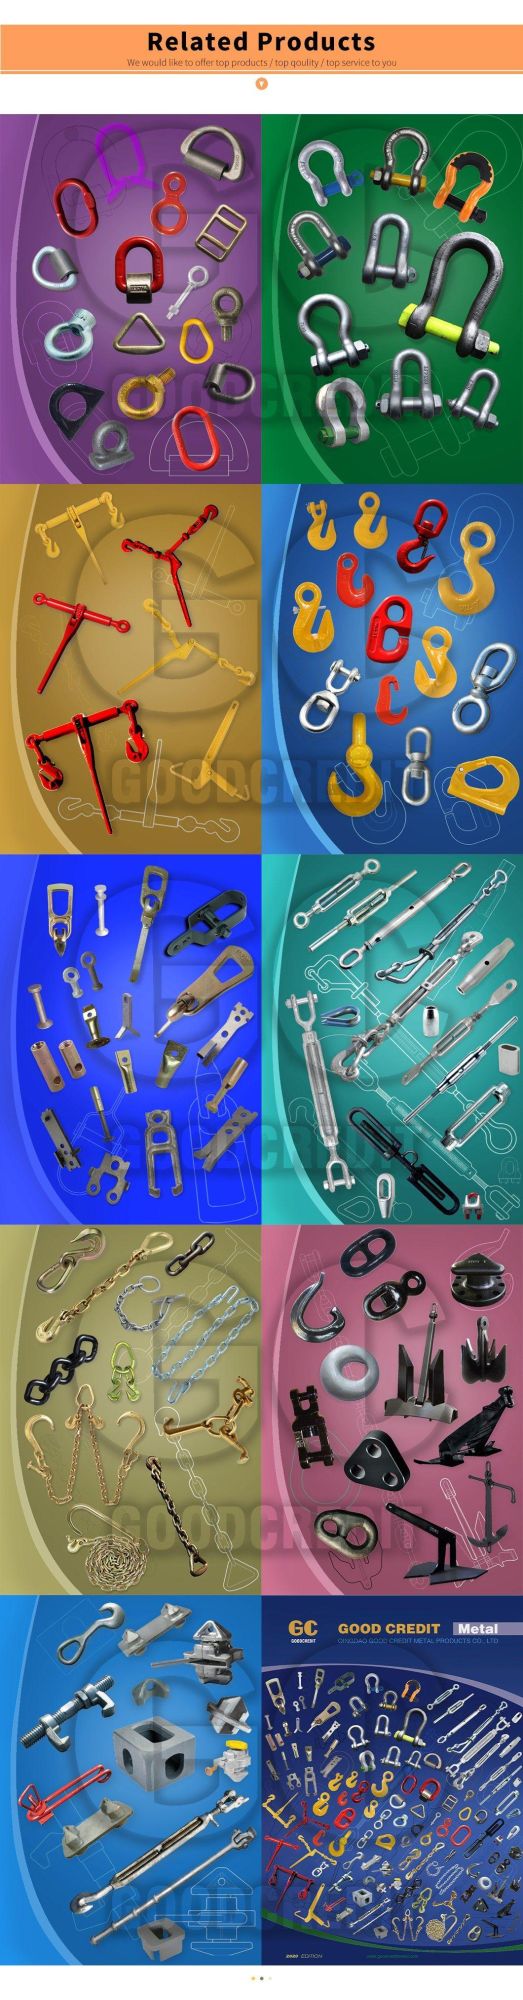 Us Type European Type Forged Ratchet Load Binders